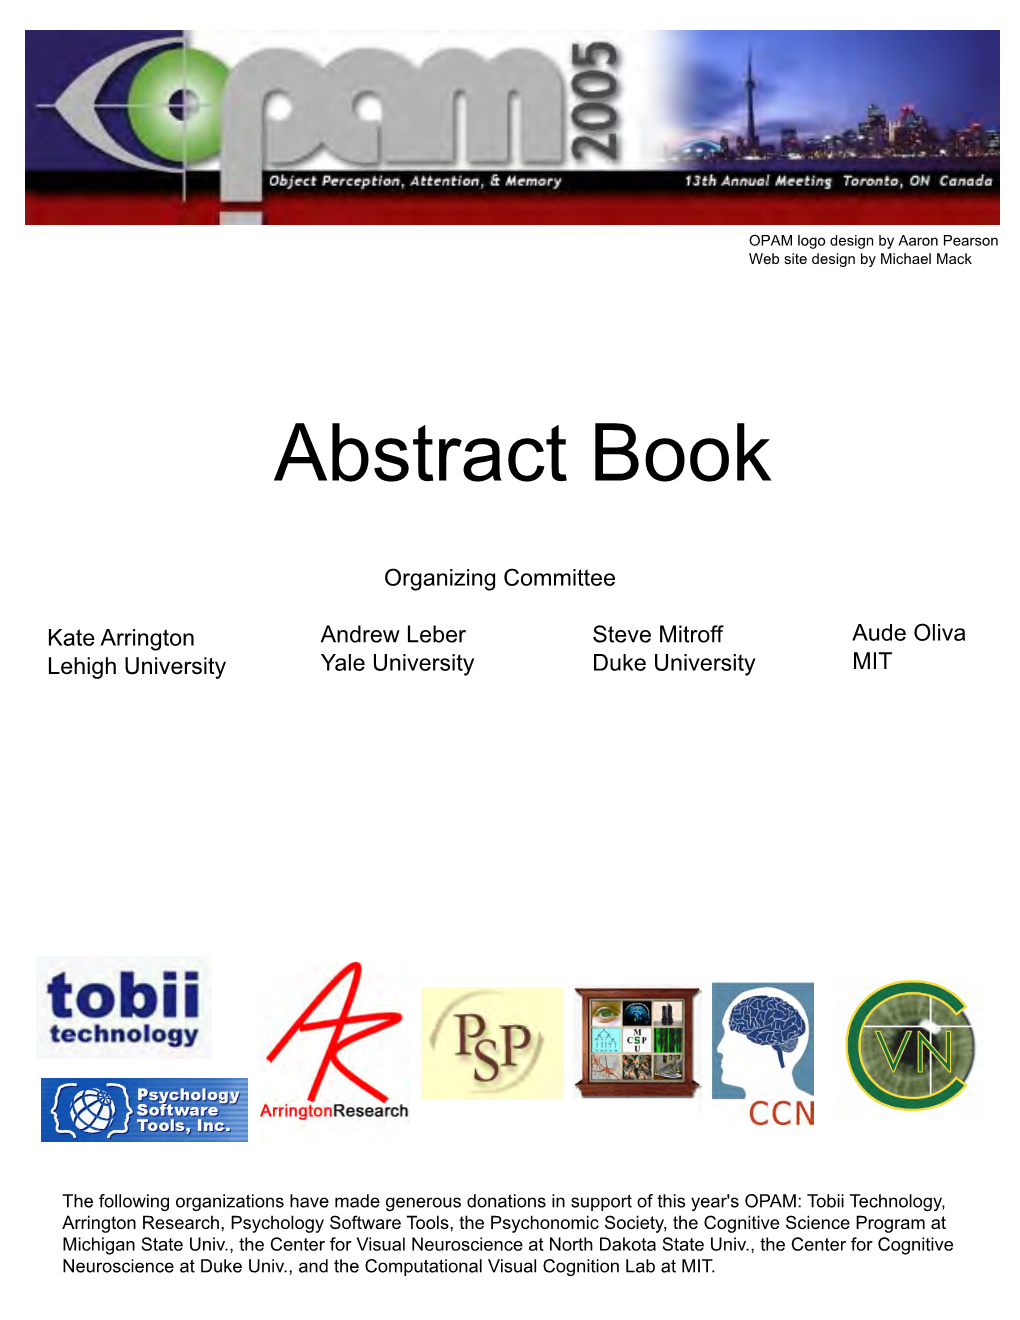 Abstract Book